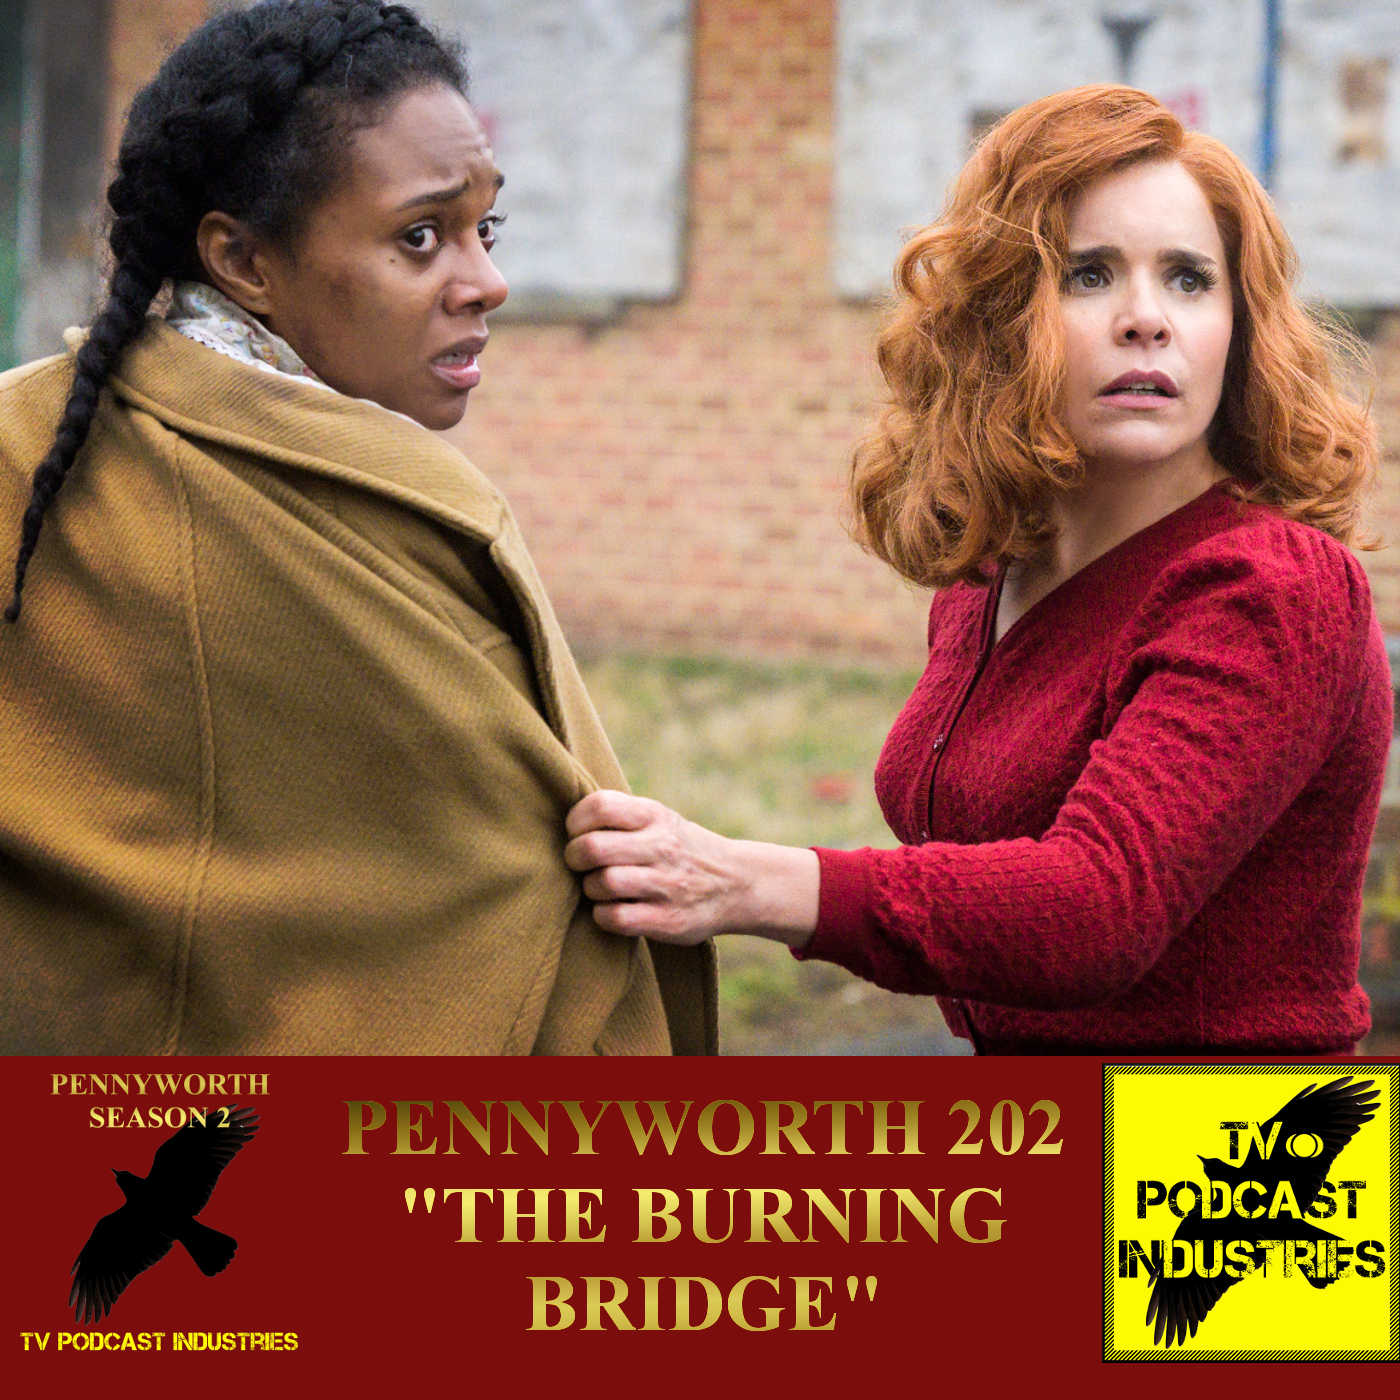 Pennyworth Season 2 Episode 2 "The Burning Bridge" Podcast by TV Podcast Industries